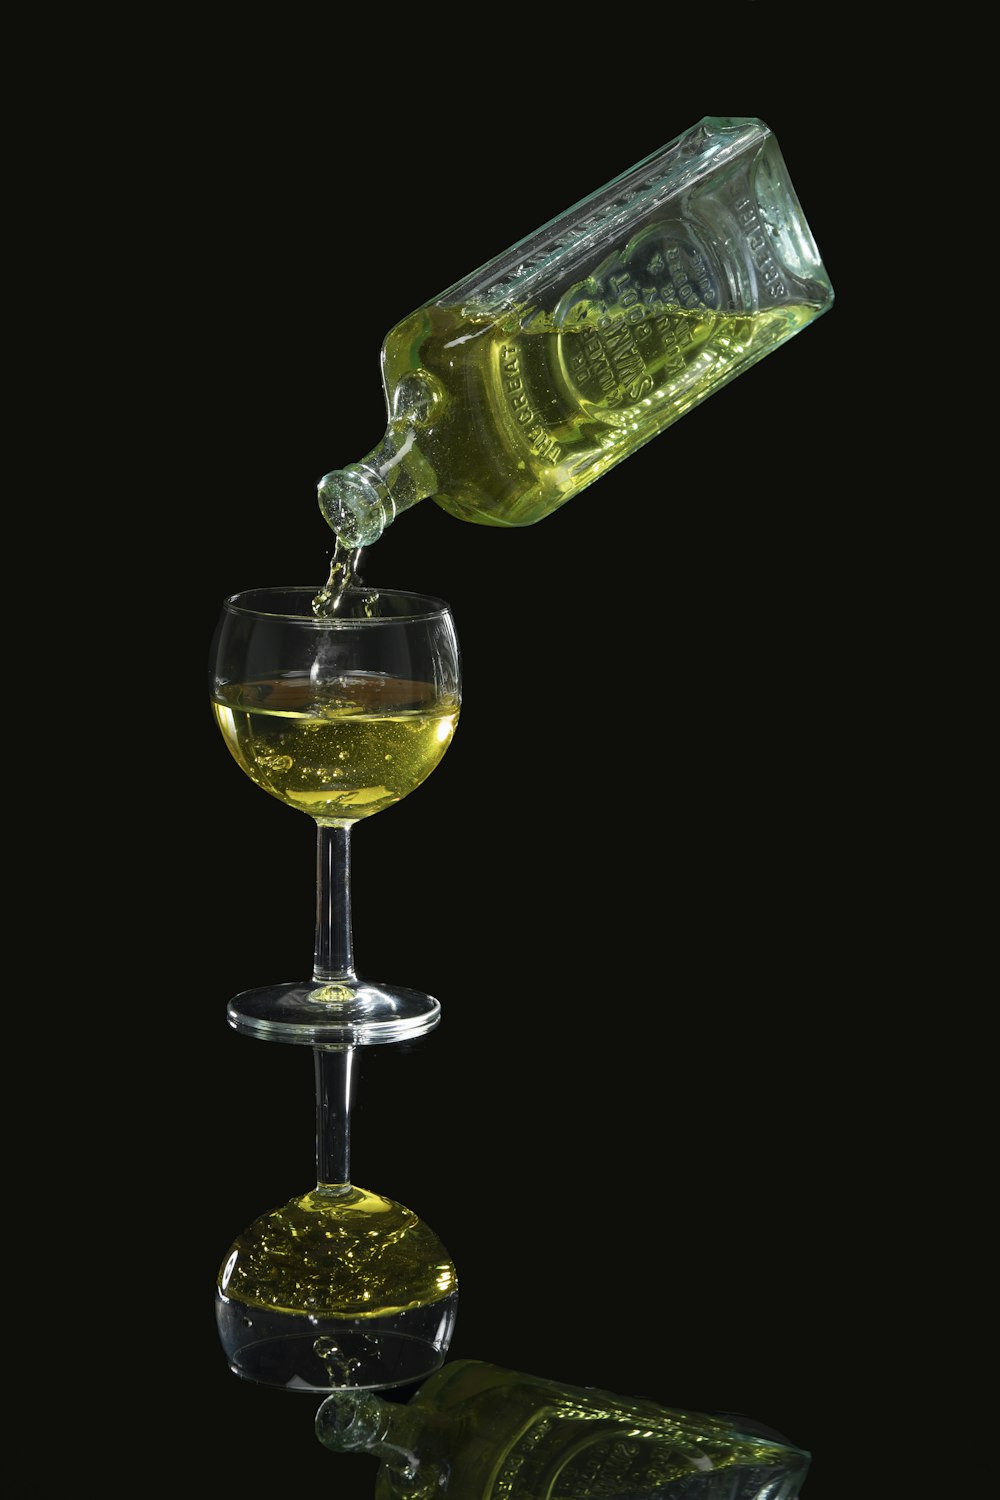 wine glass and glass bottle